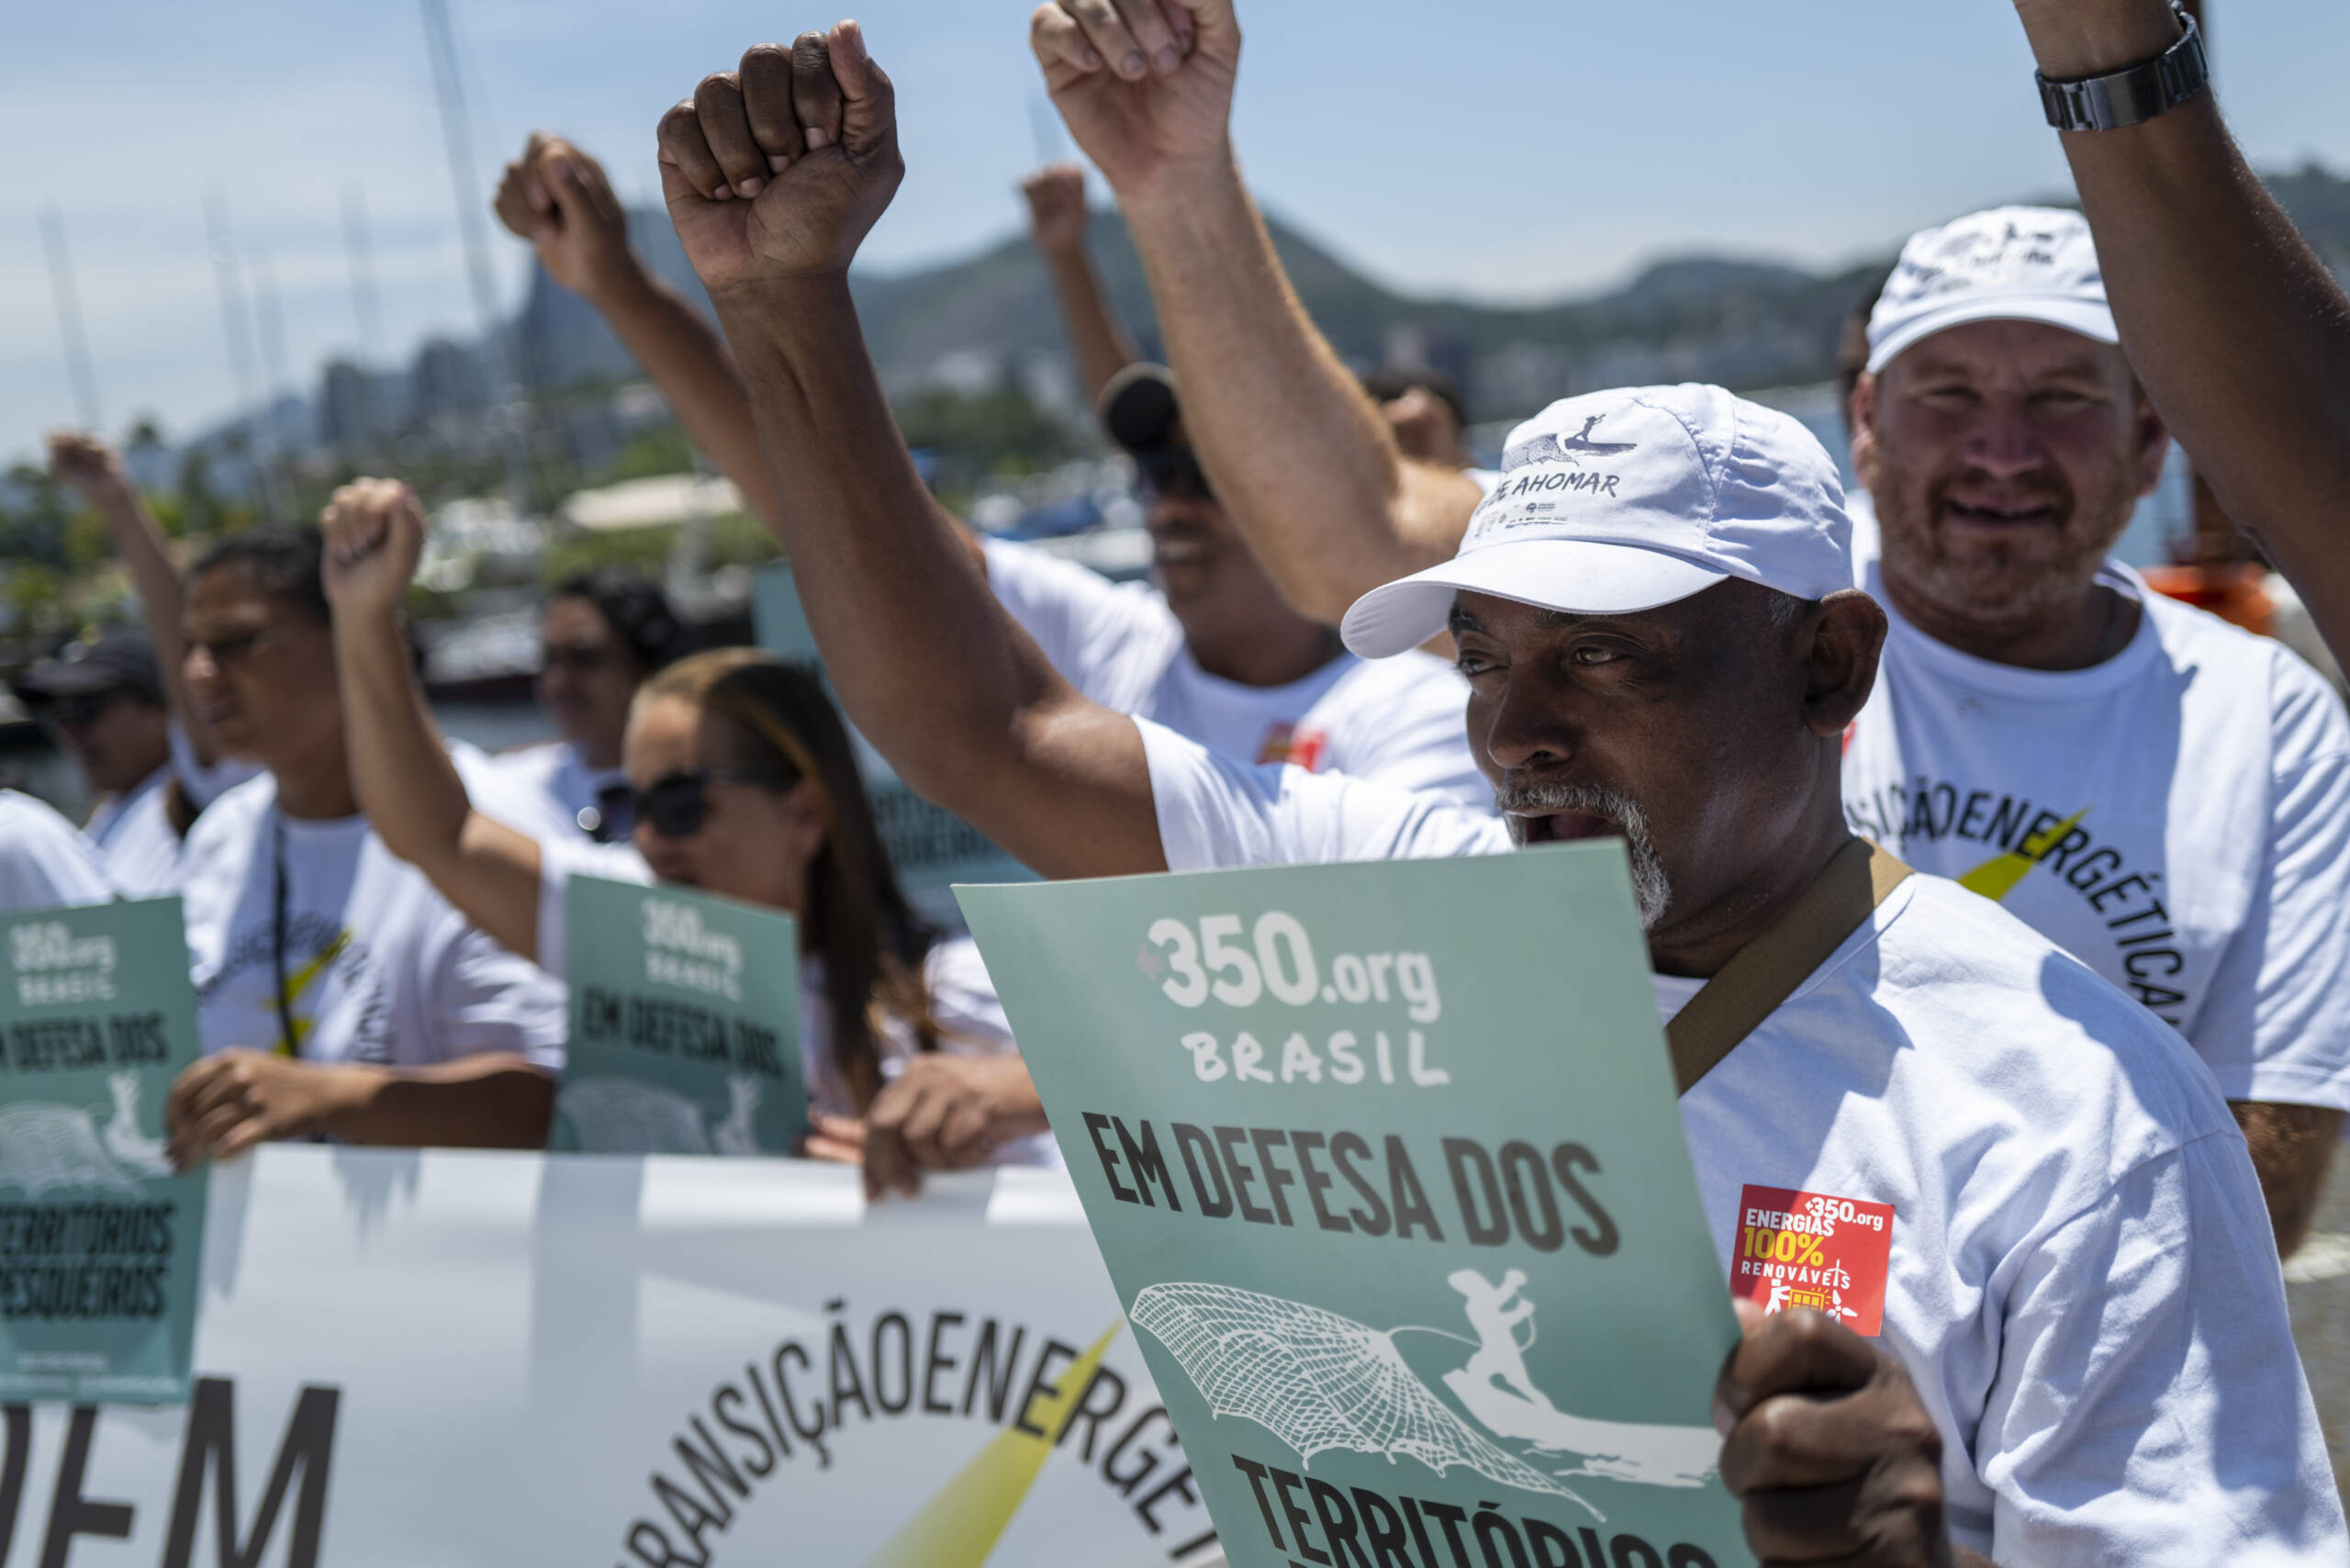 Rio de Janeiro, Brazil, November 3: artisanal fishermen protest in front of Guanabara Bay, demanding the Brazilian government to stop subsidizing oil and gas and to invest more on renewable energy sources. Photo credit: Lucas Landau